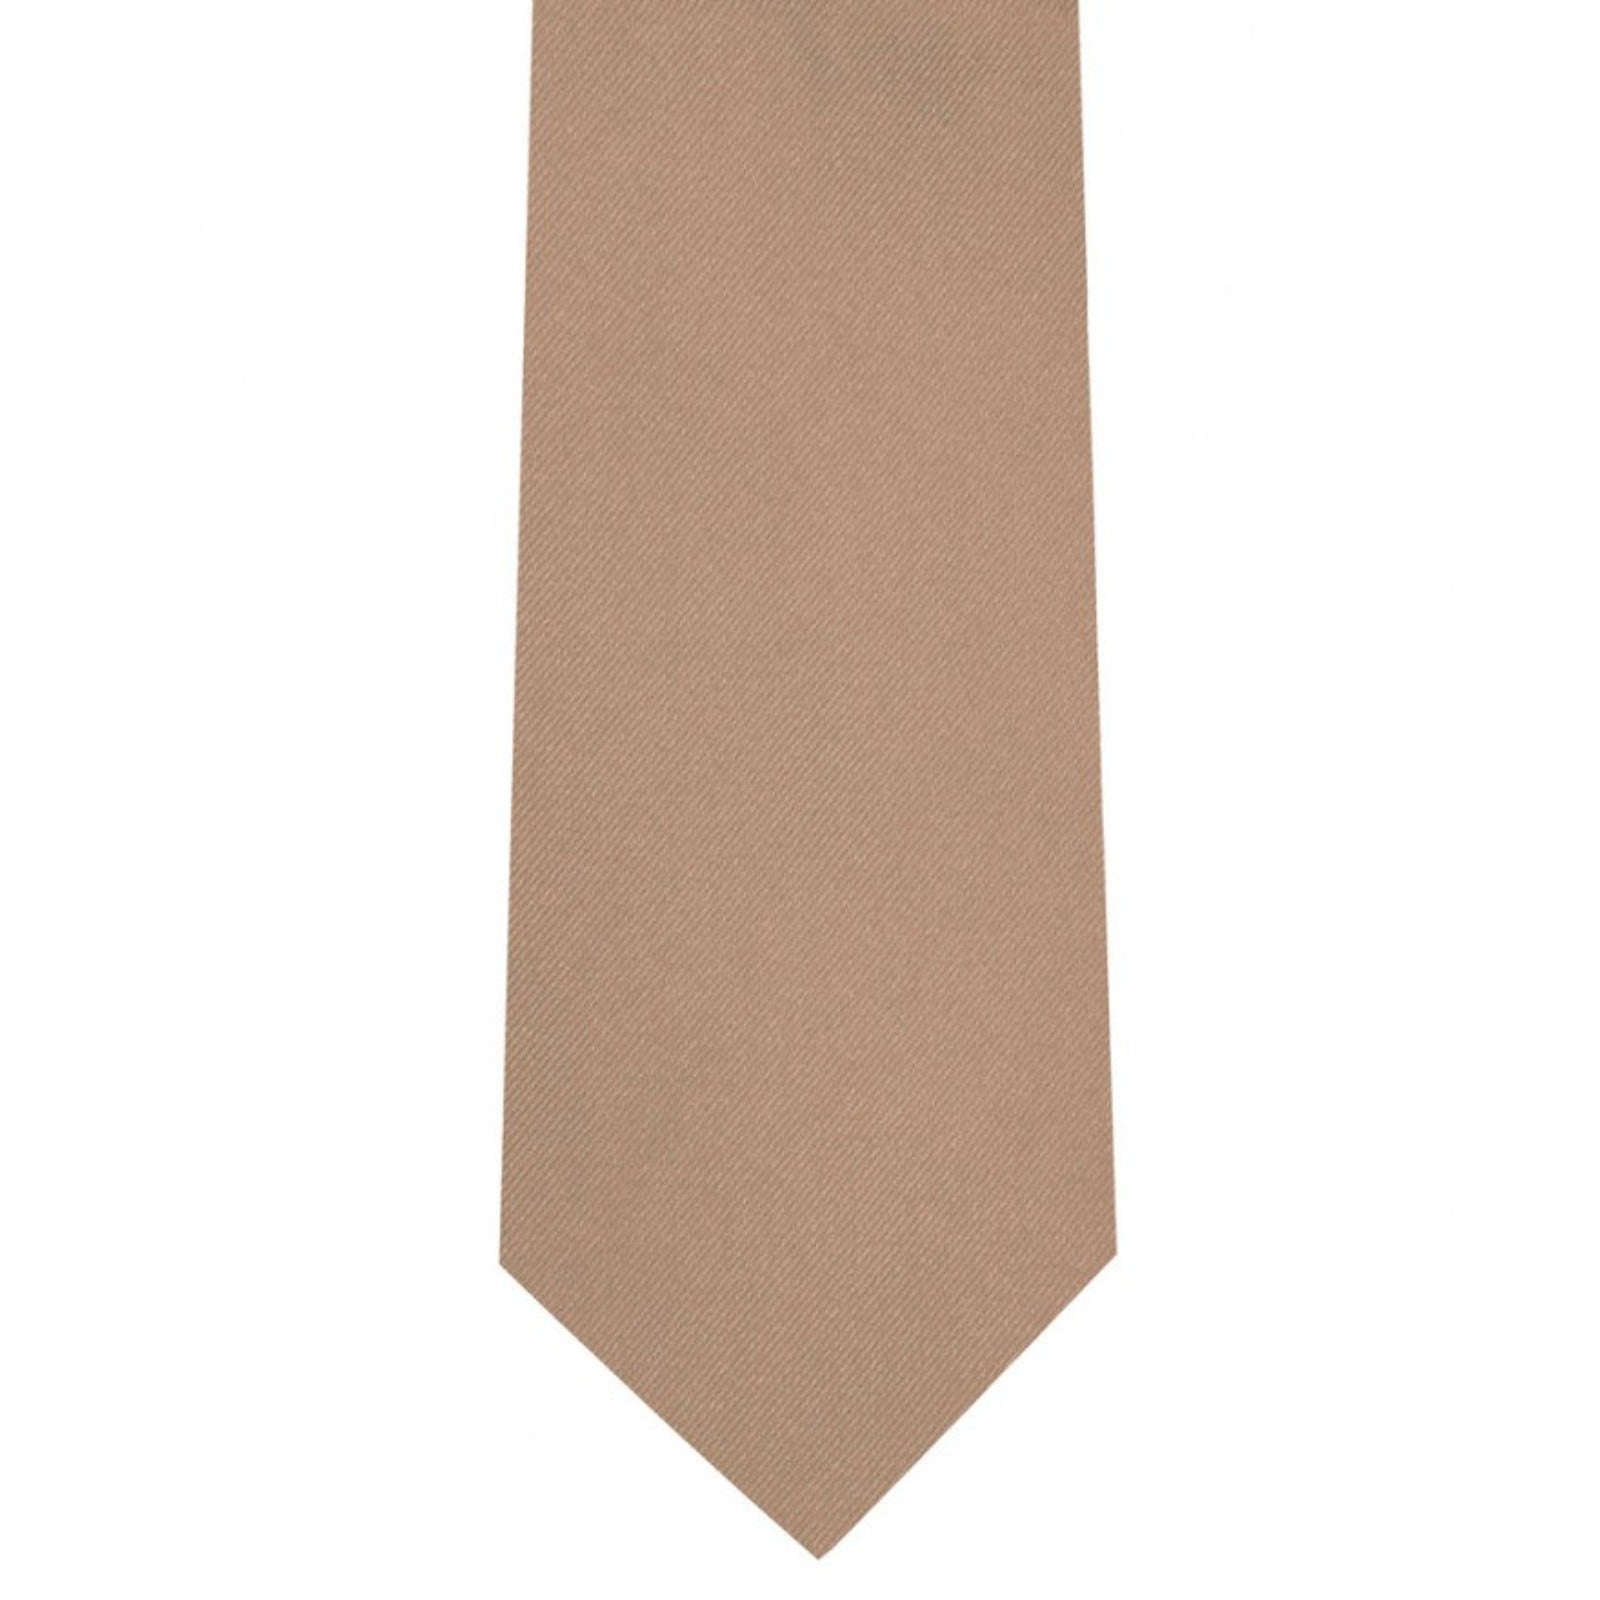 Classic Rose Gold Tie Ultra Skinny tie width 2.25 inches With Matching Pocket Square | KCT Menswear